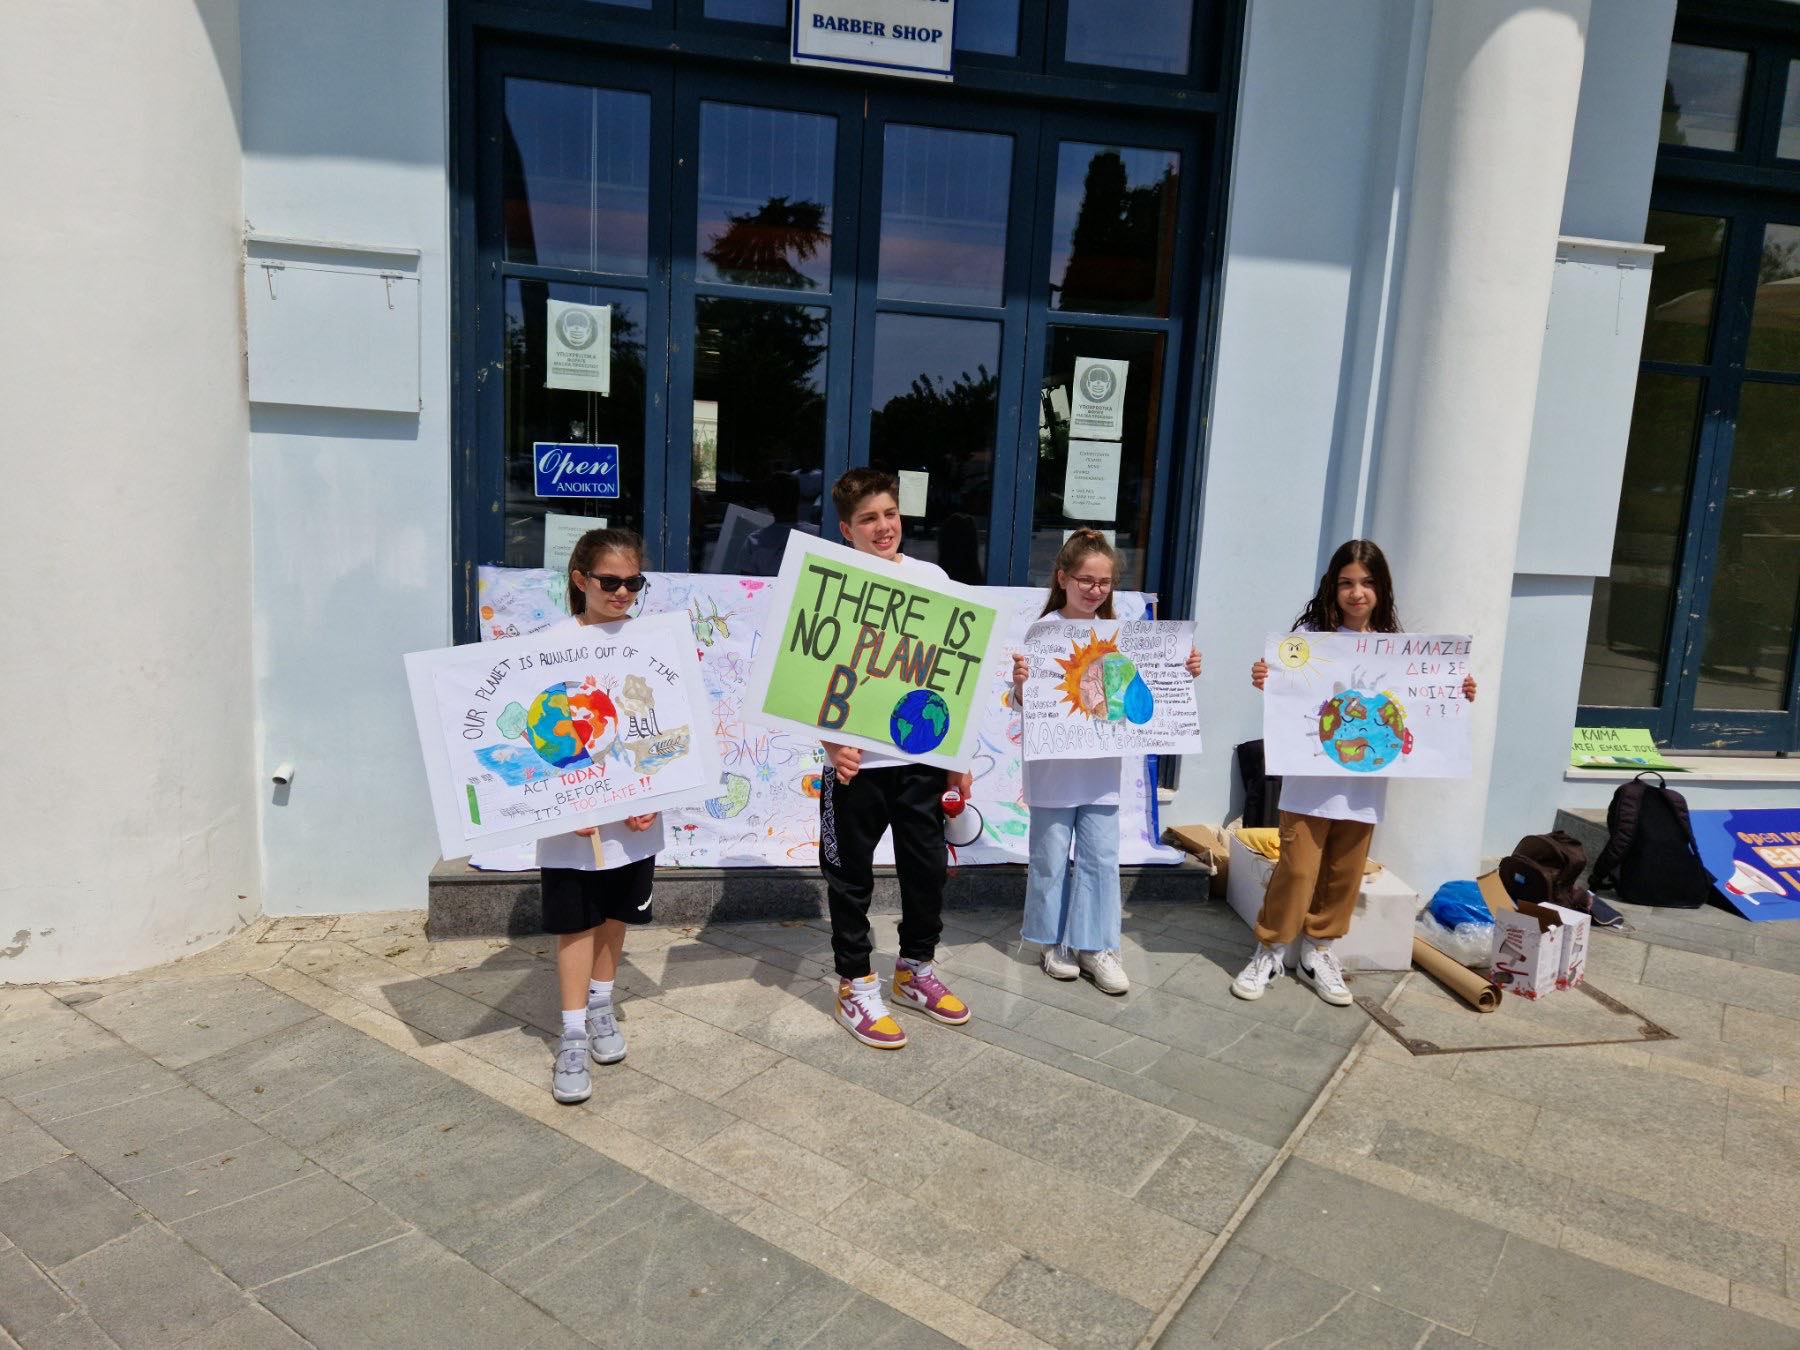 Students protested for the Climate change